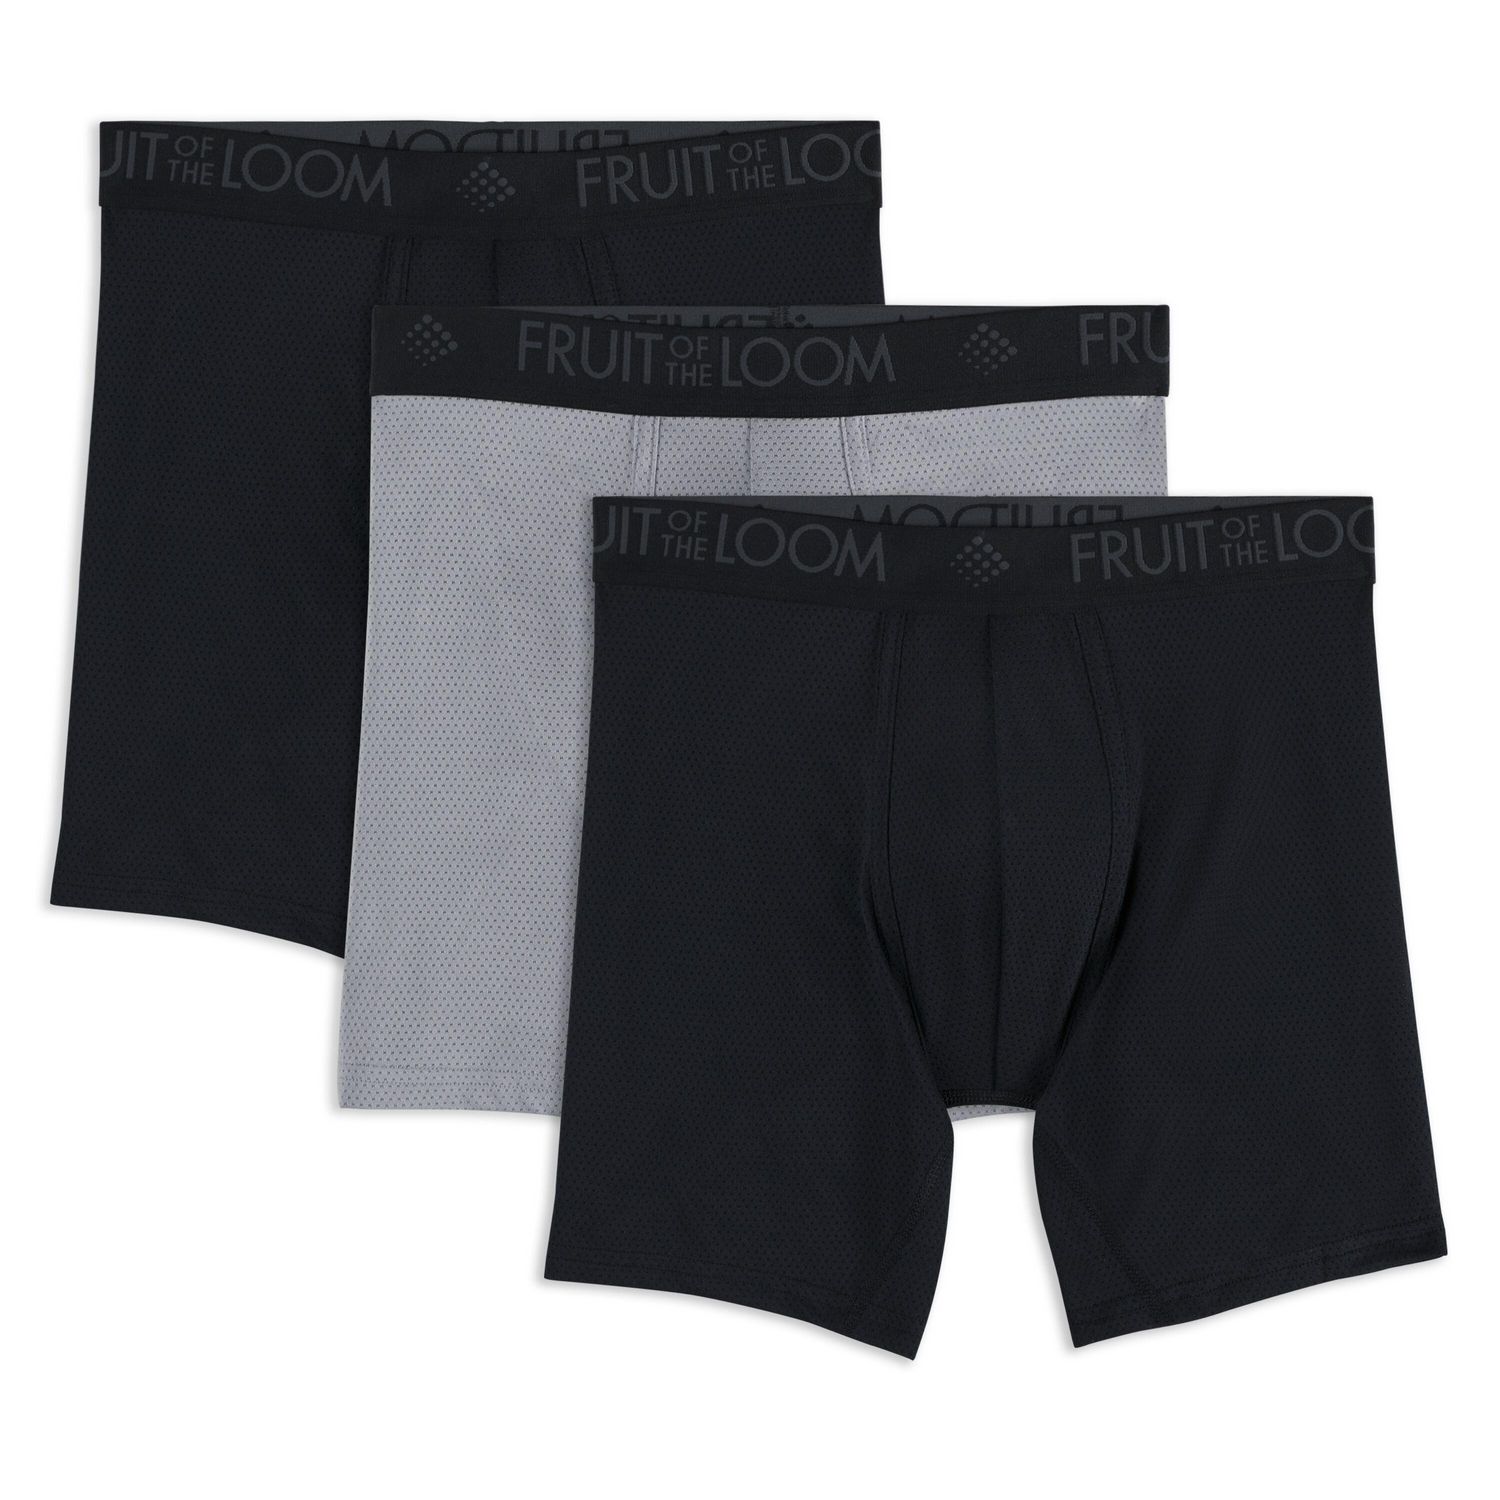 24 Pieces Men's Fruit Of The Loom 3 Pack Briefs, Size 2xl - Mens Underwear  - at 